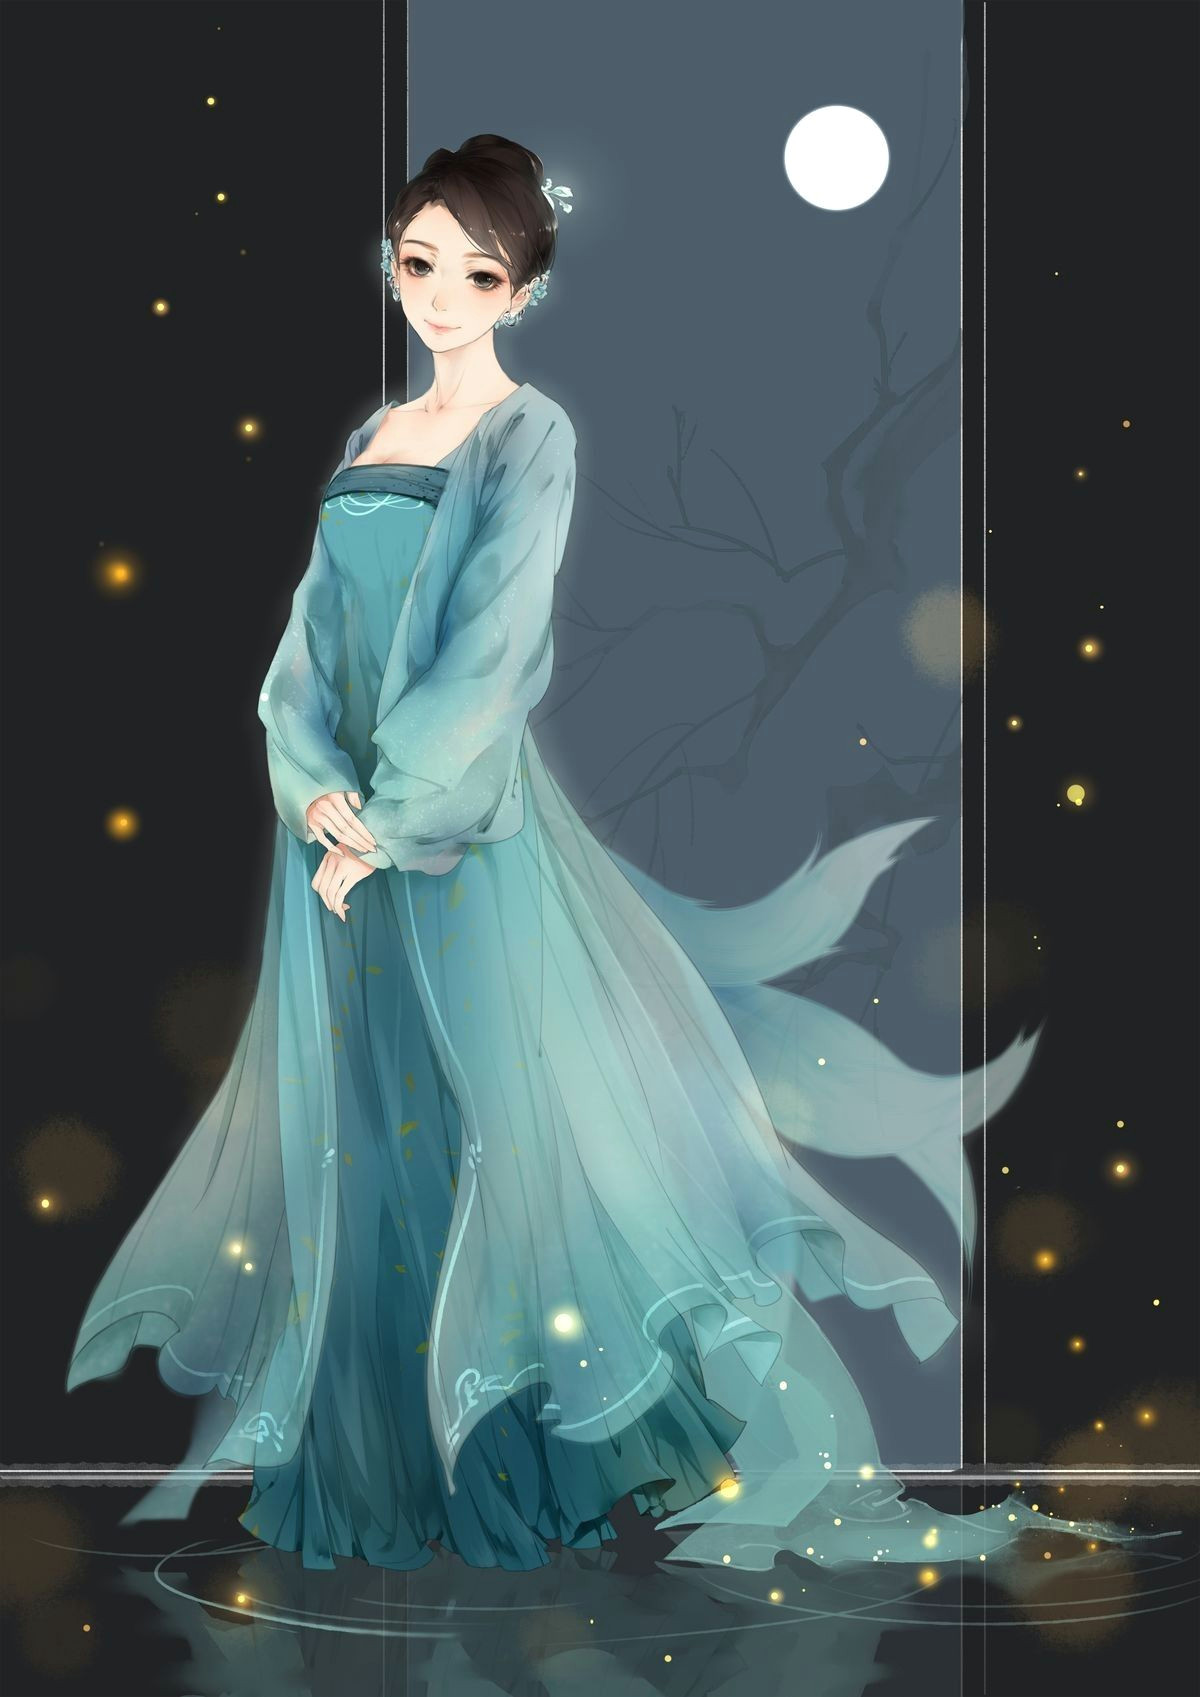 Drawing Of Girl In Blue Dress Pin by Ava On Picture E C Aoo Pinterest Chinese Art Art and